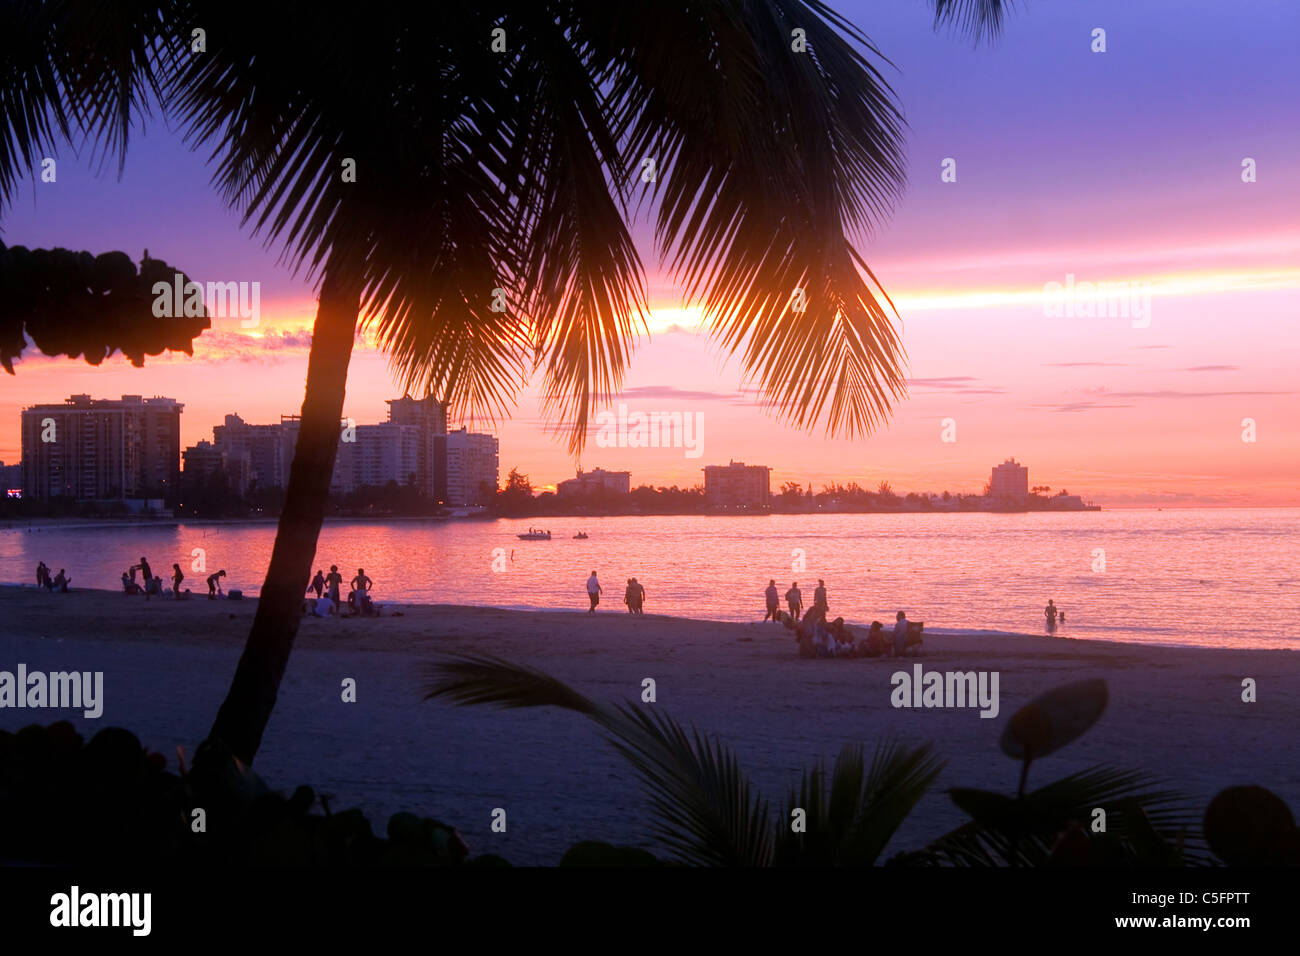 A beautiful sunset in the Isla Verde section of San Juan Puerto Rico. Stock Photo